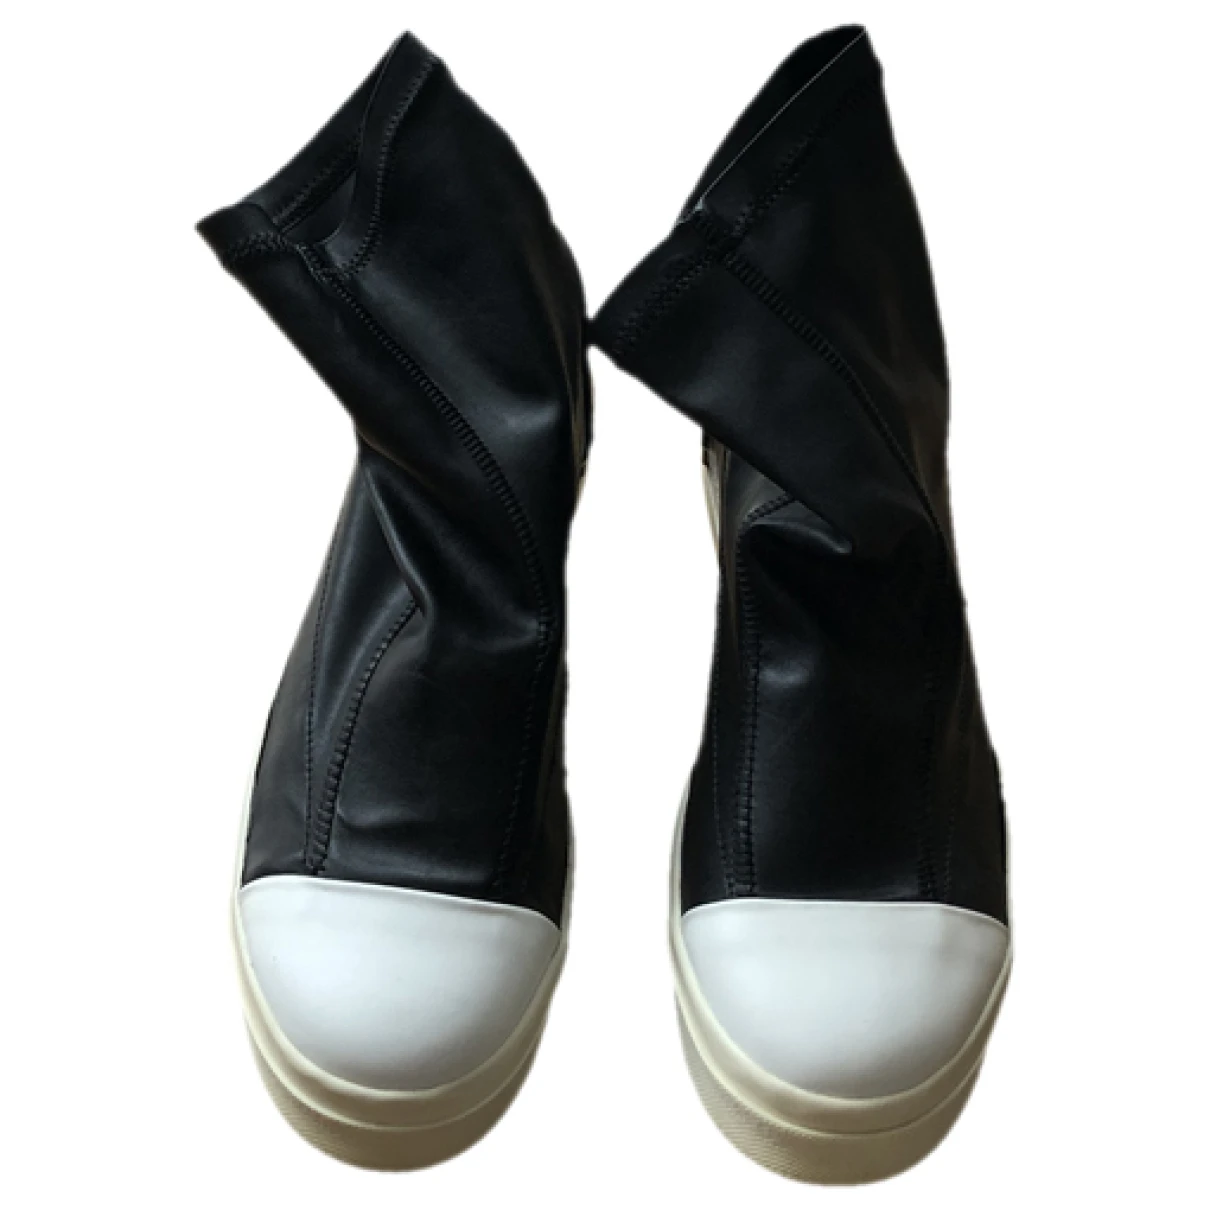 Pre-owned Cinzia Araia Leather High Trainers In Black